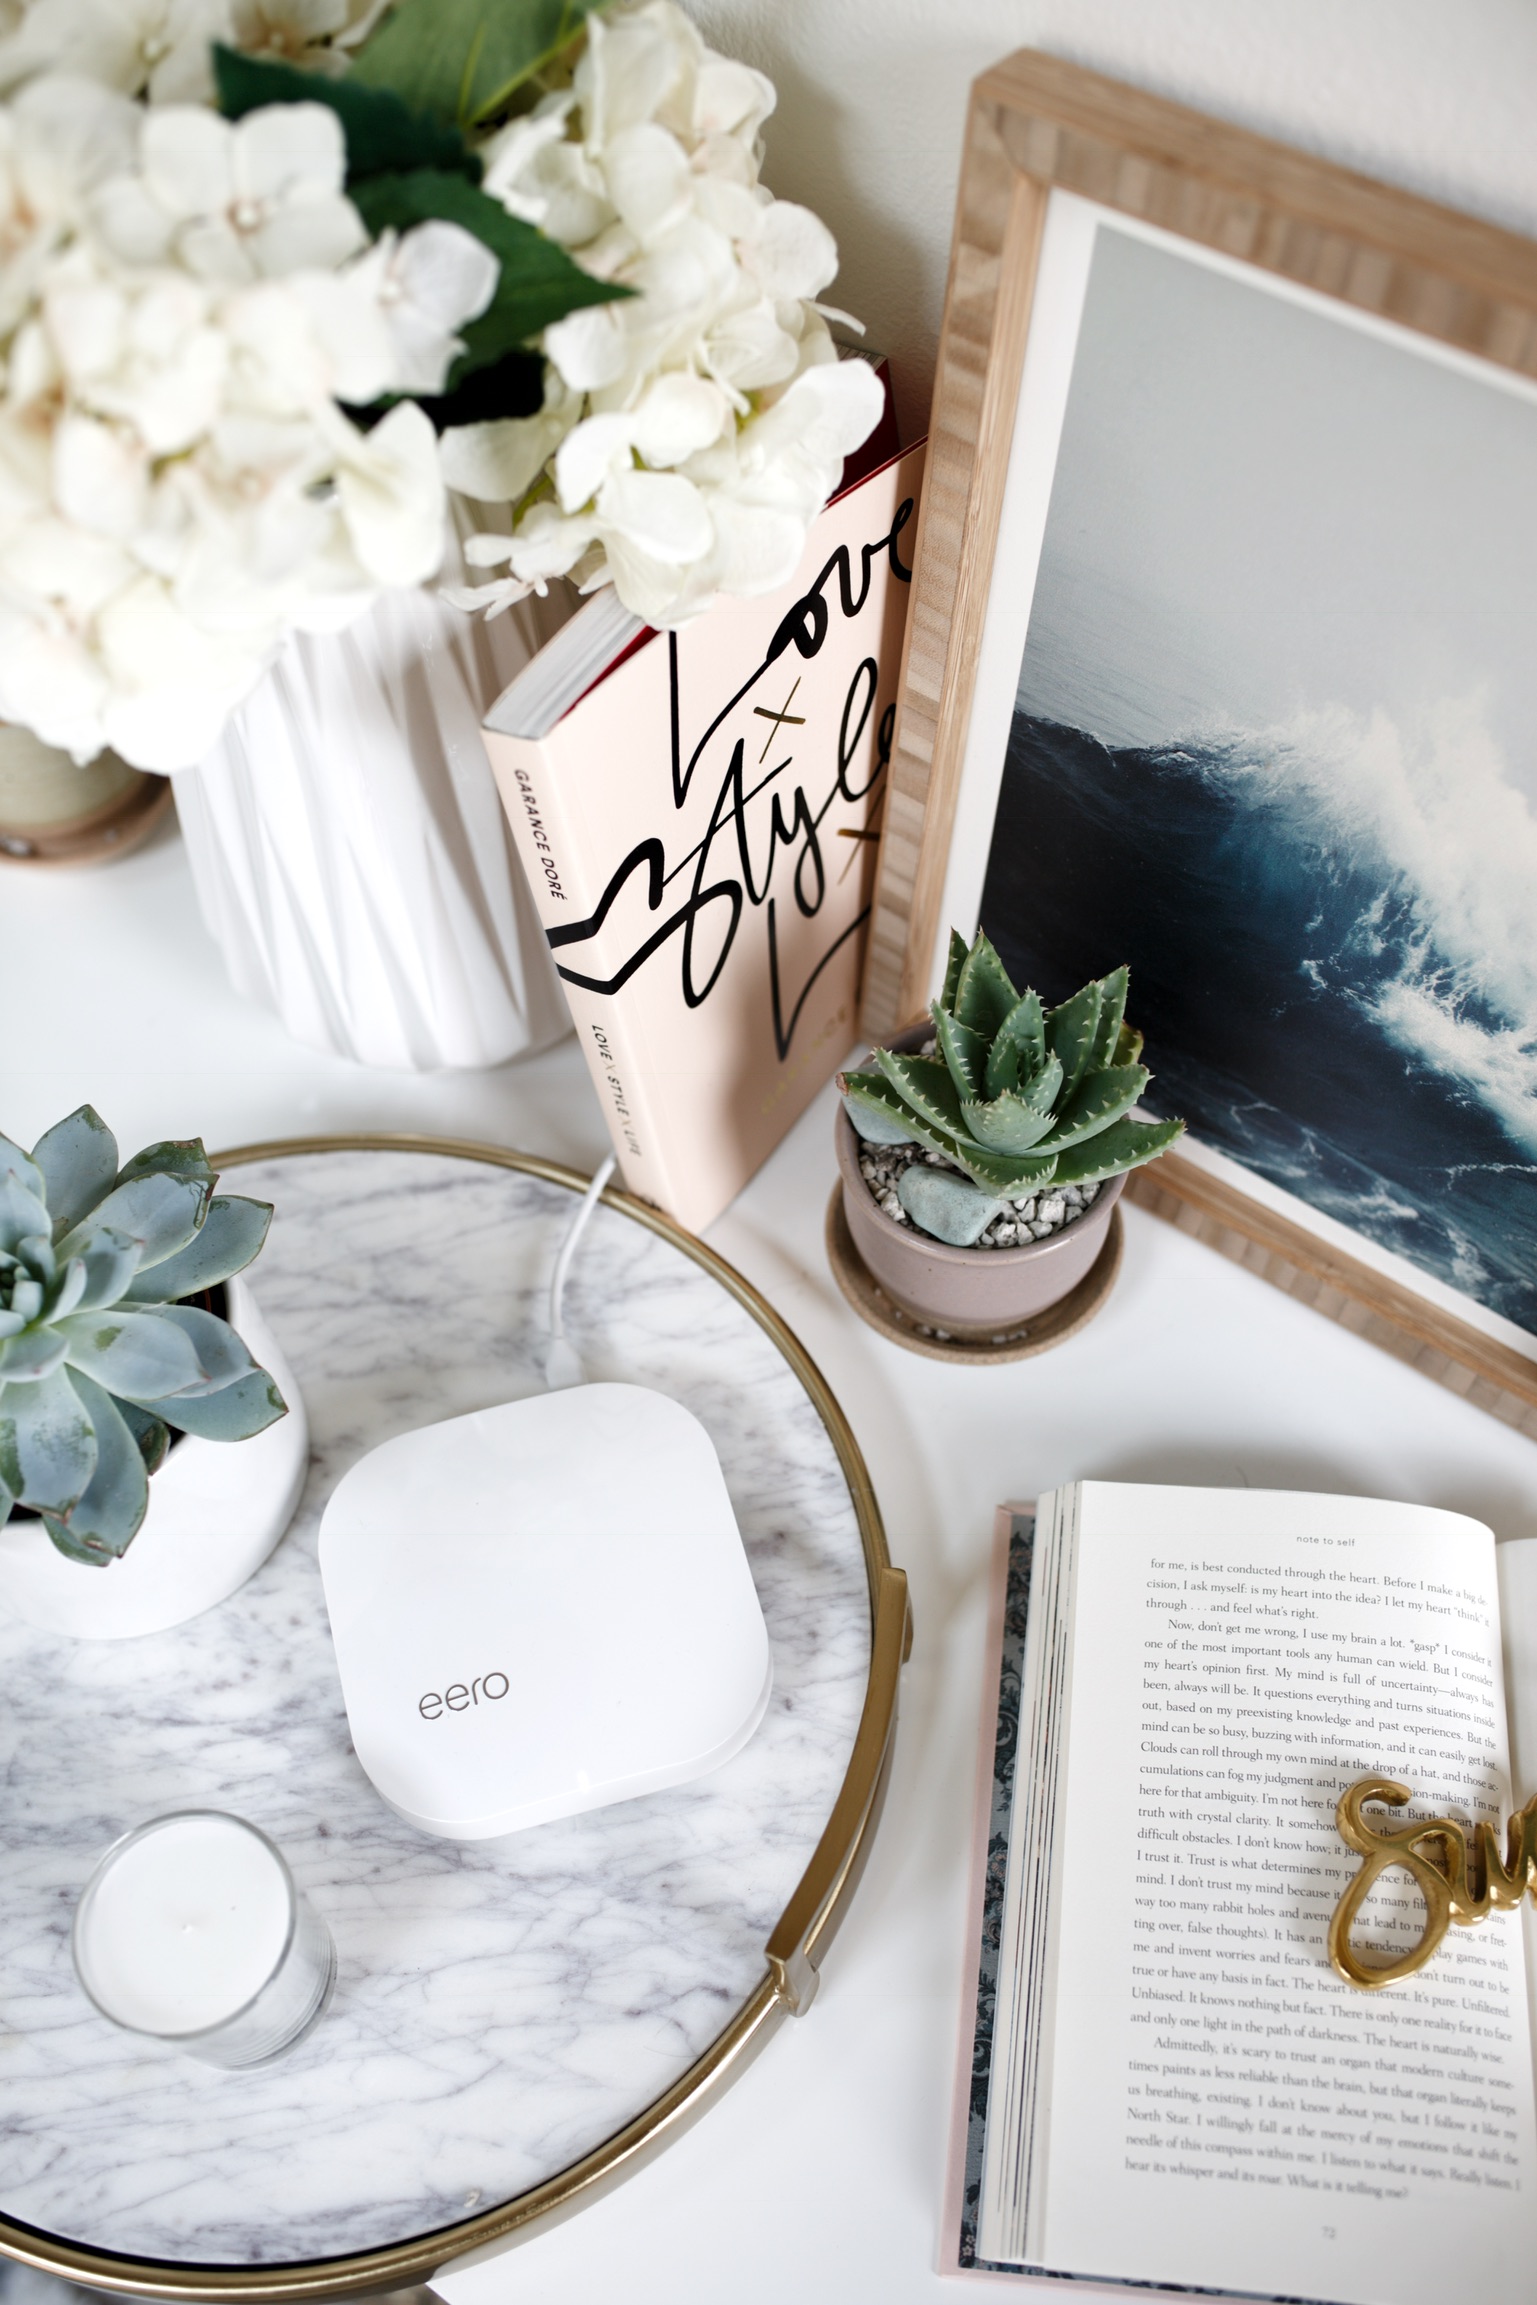 Improve WiFi in your Home Eero Review